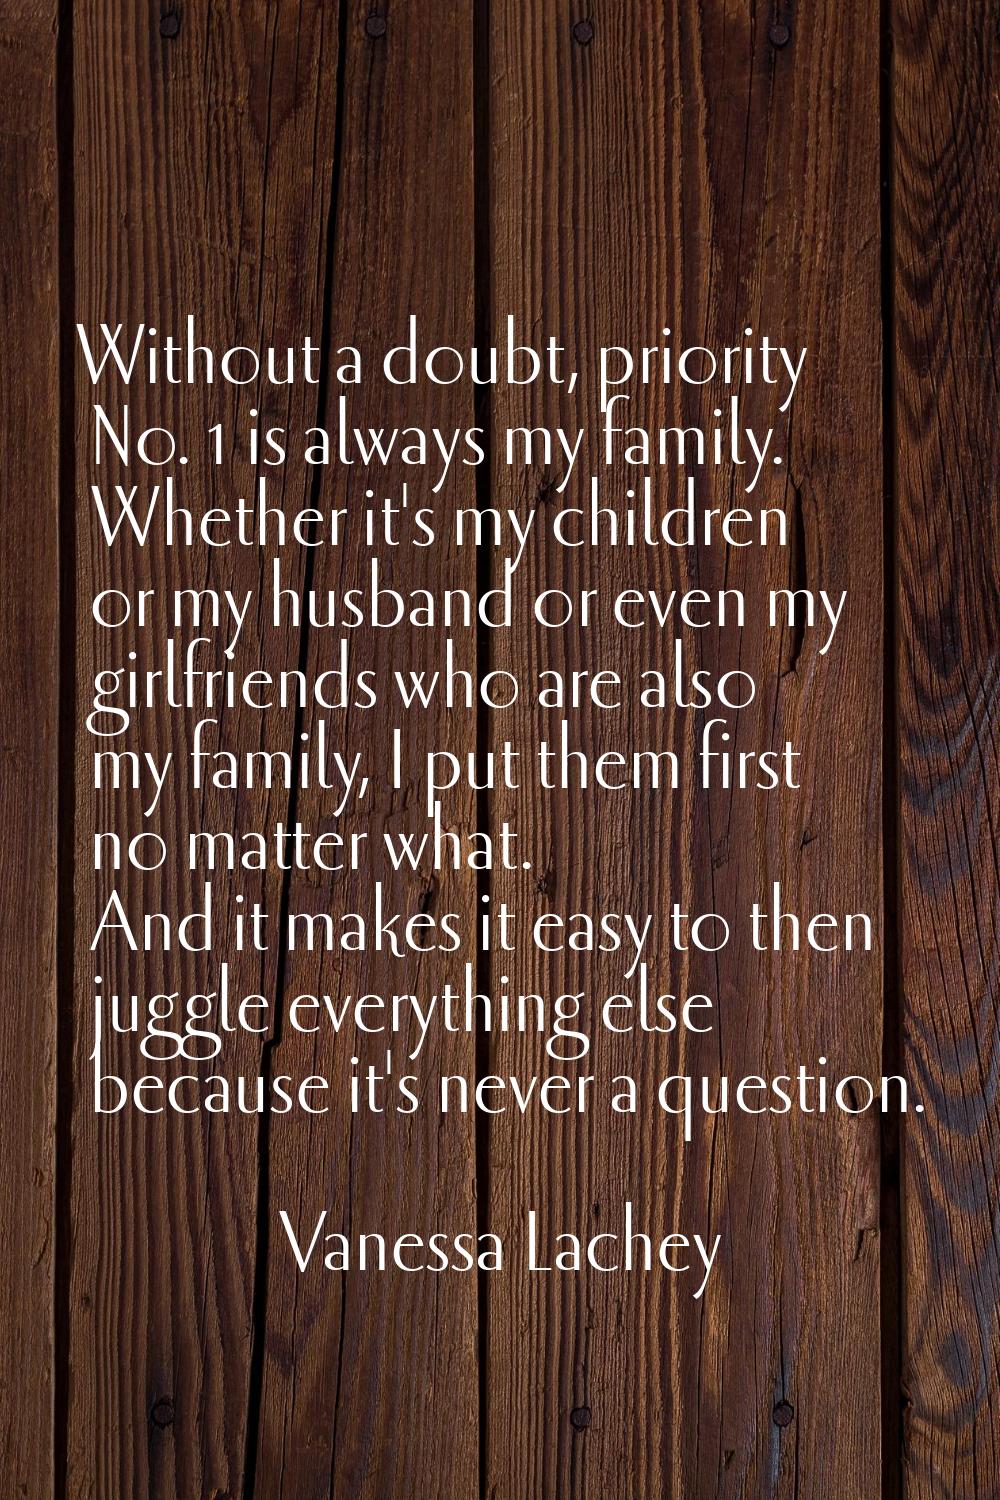 Without a doubt, priority No. 1 is always my family. Whether it's my children or my husband or even